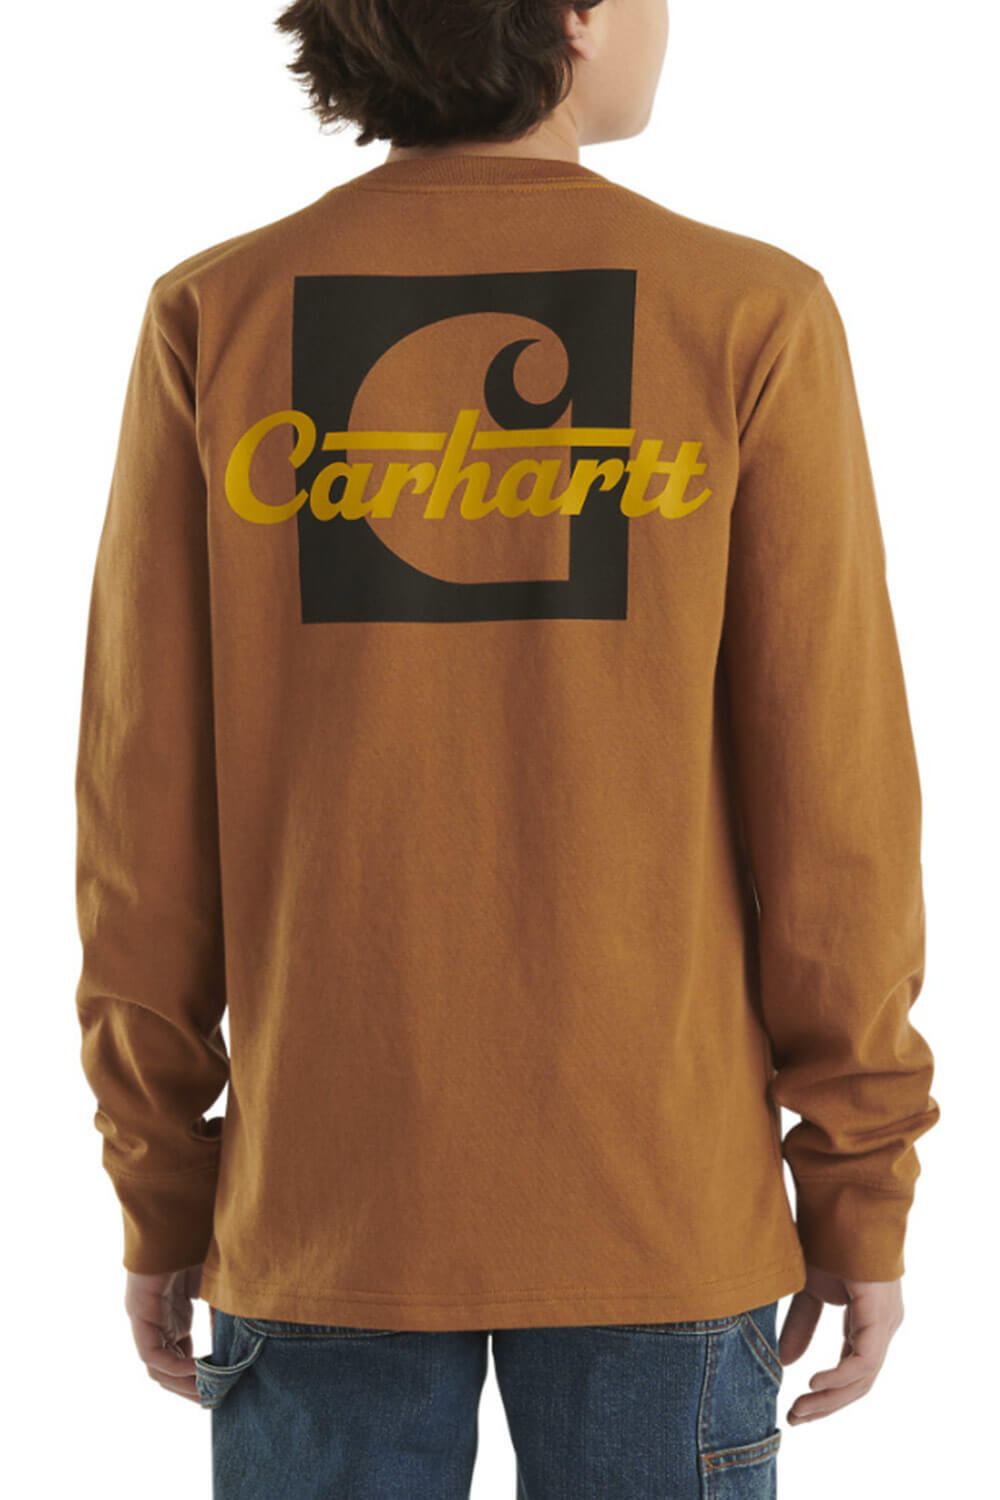 Carhartt Youth Pocket Graphic Long Sleeve T-Shirt for Boys in Brown